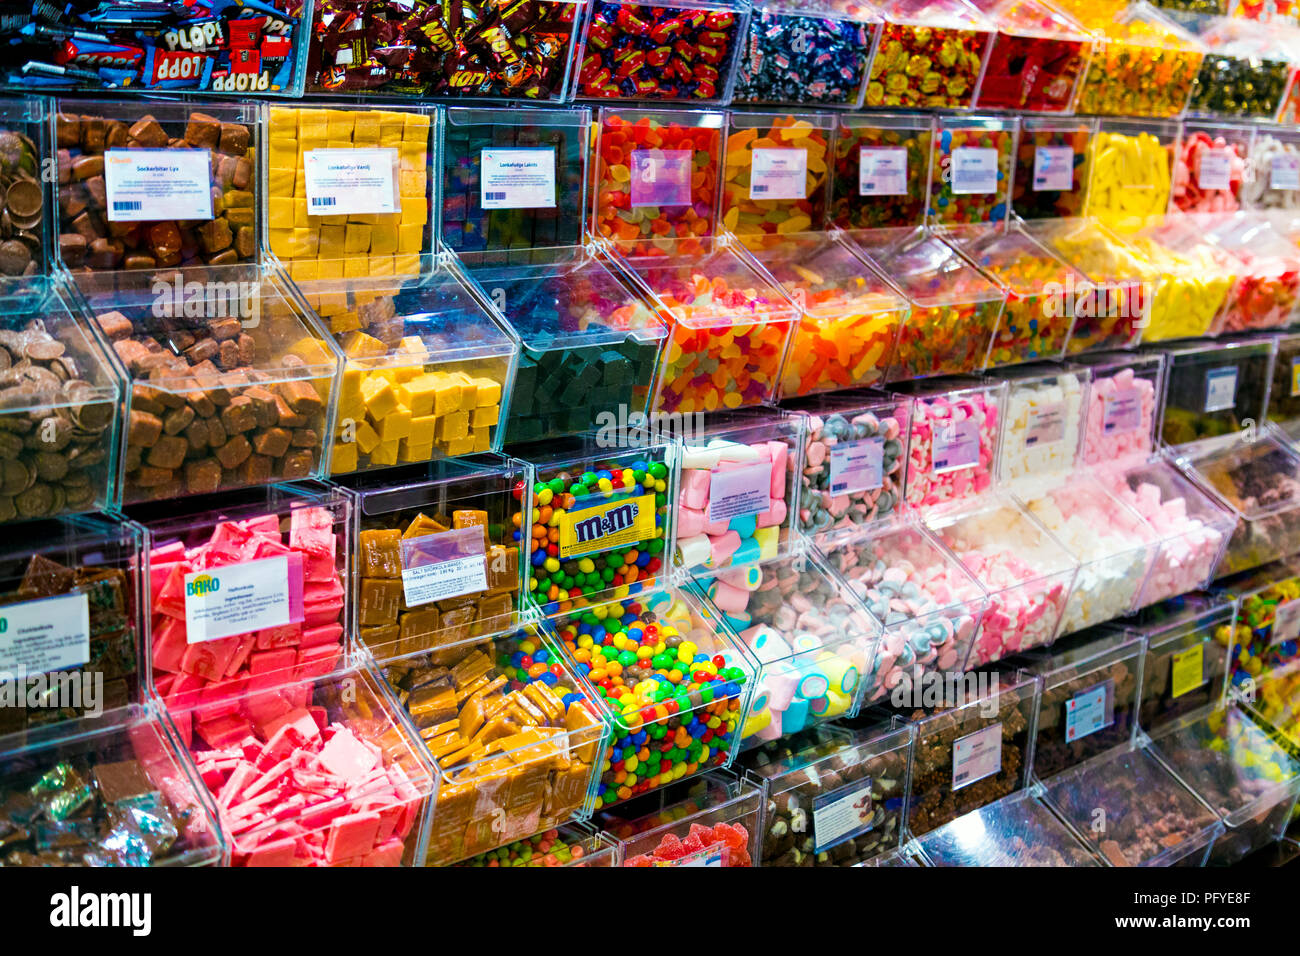 Create A Pick 'N' Mix And We'll Tell You Your True Age